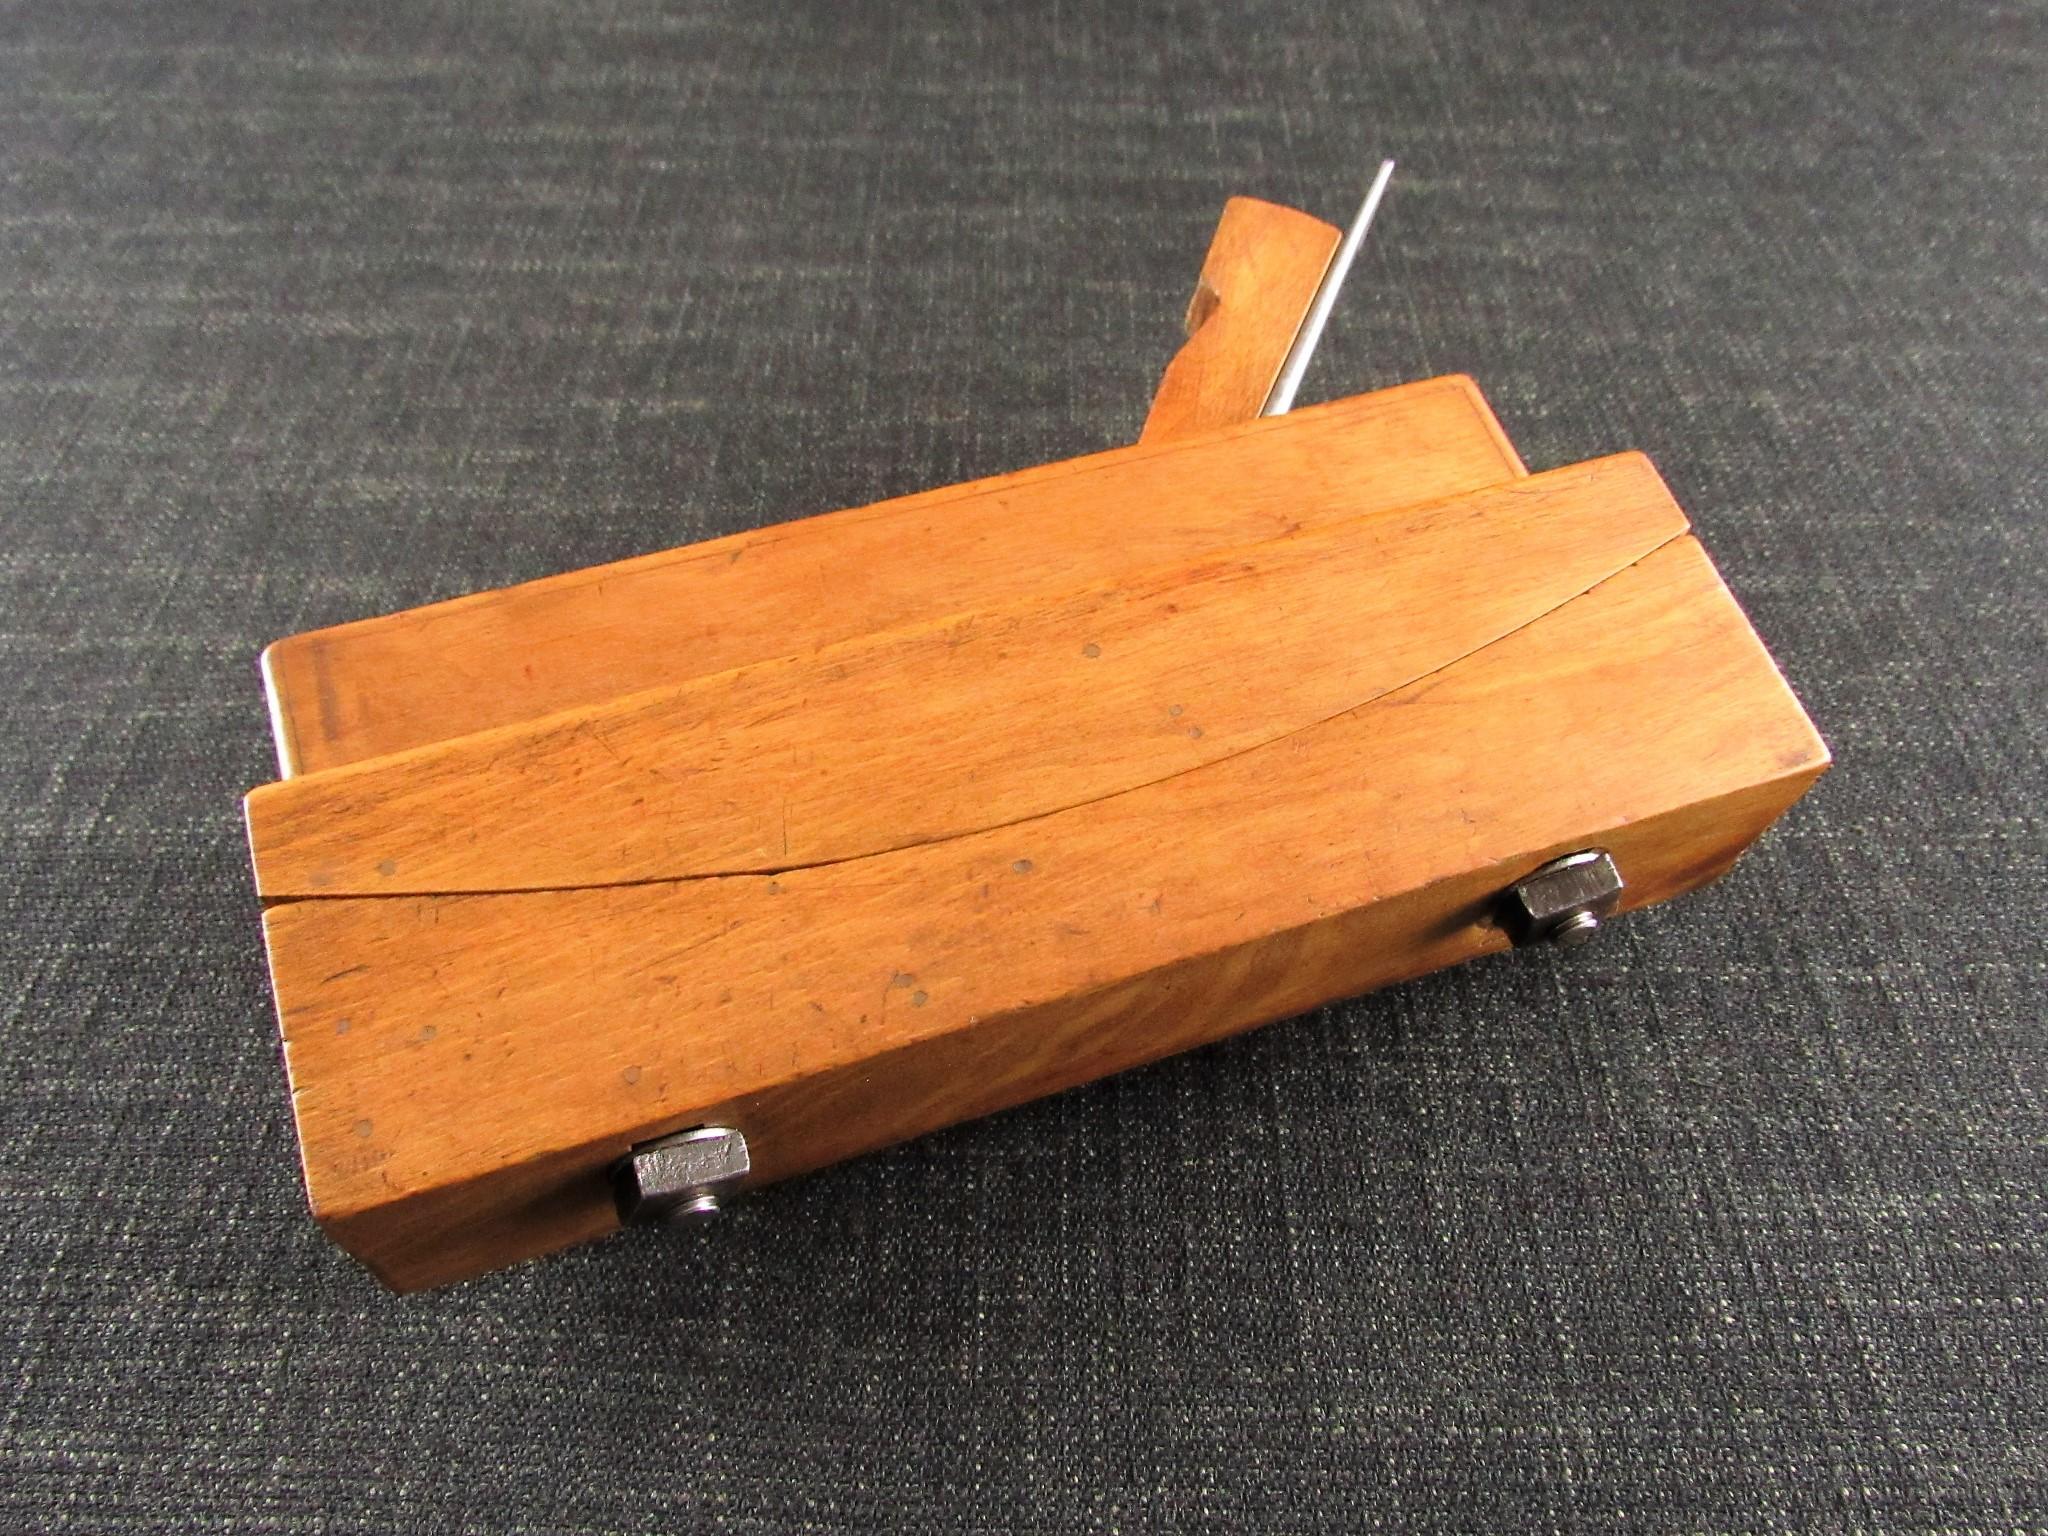 Unusual Wooden Compass Plough Plane by C JACOB of Strassburg